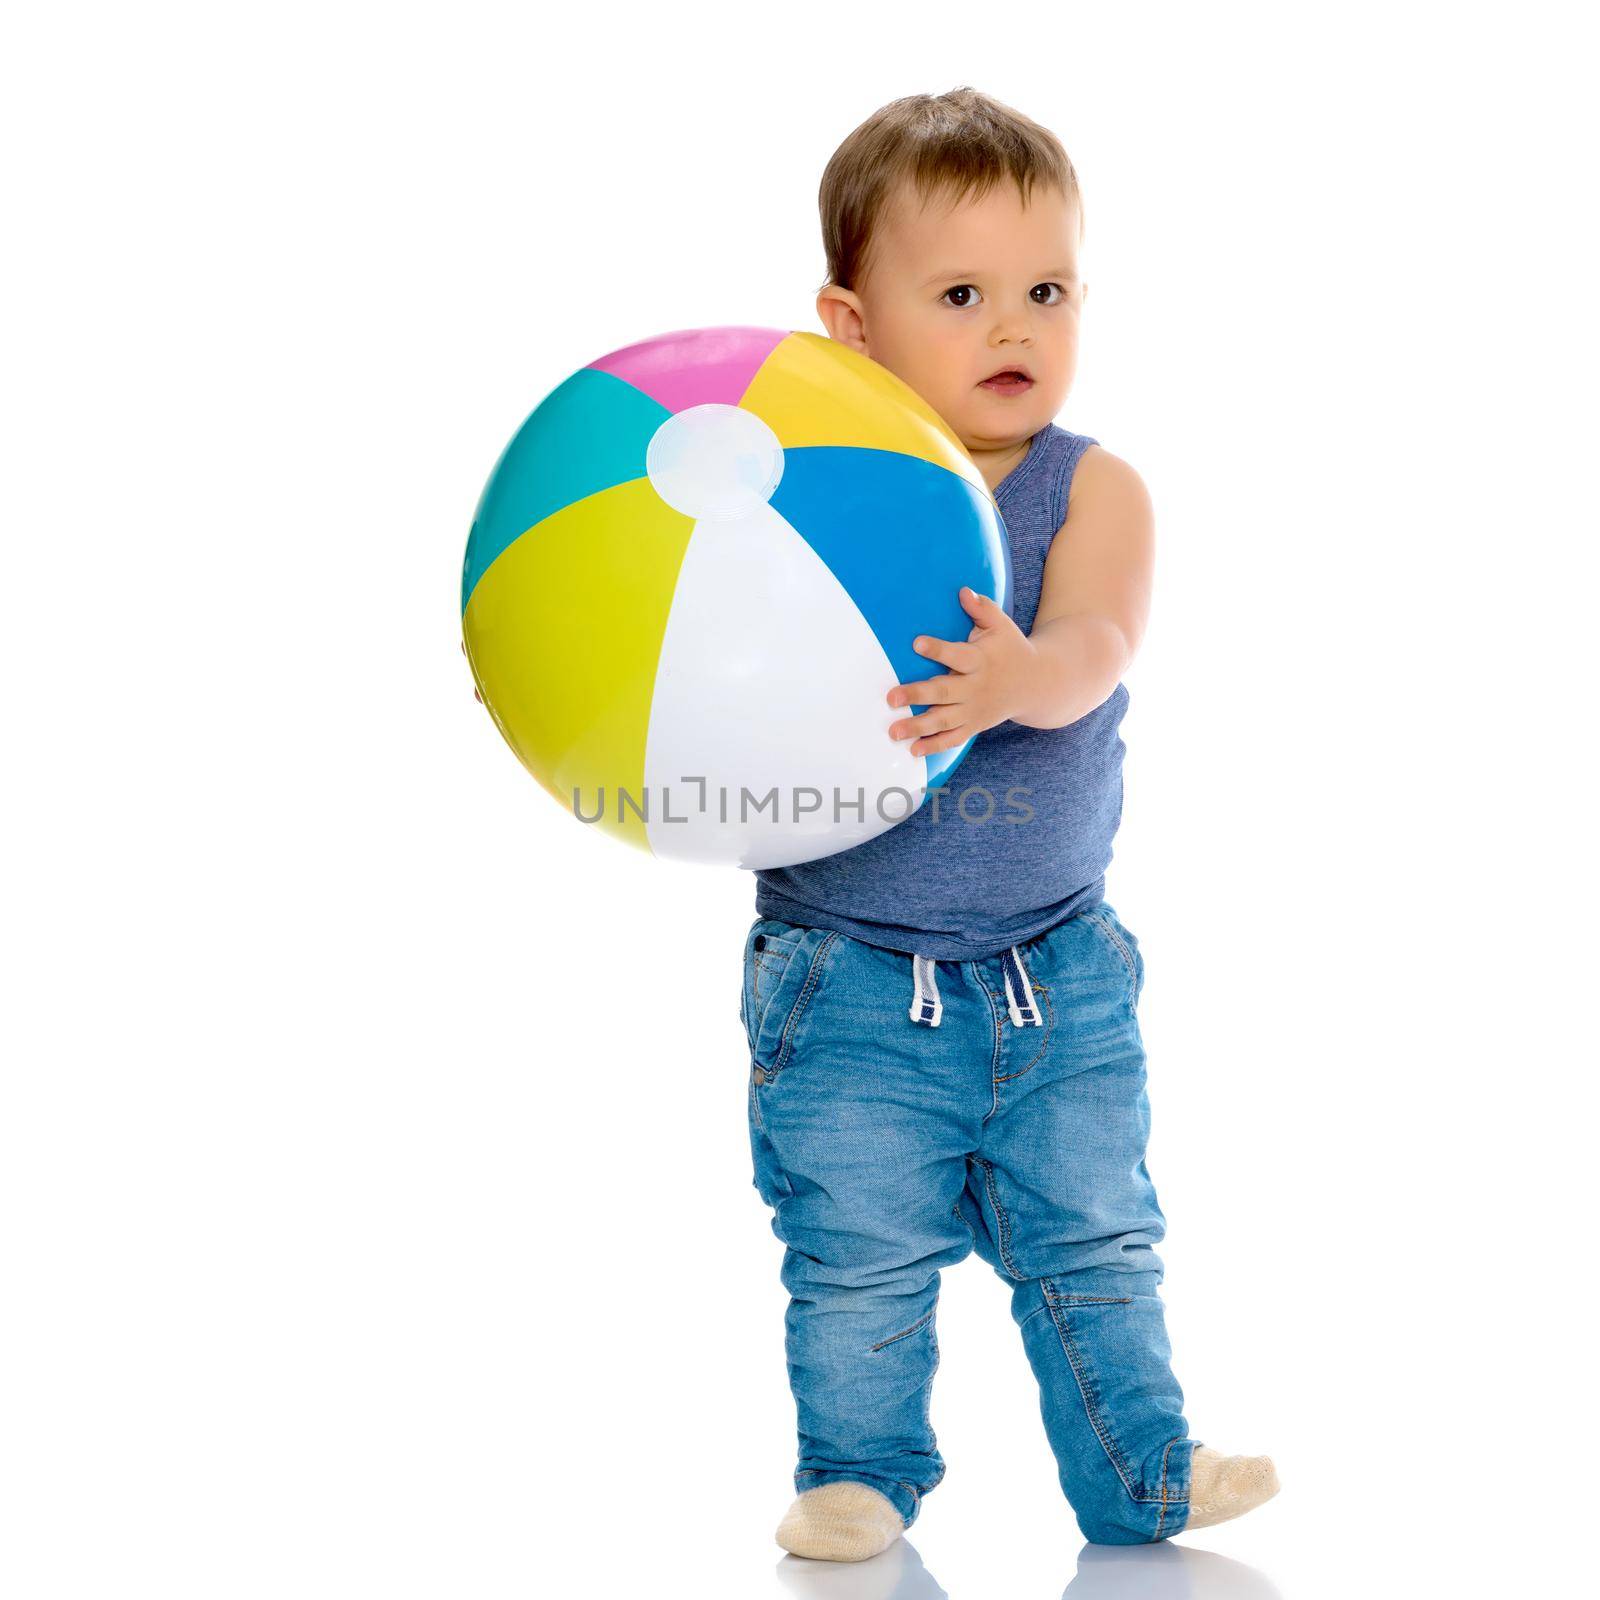 A cheerful little boy is playing with a ball in the studio on a white background. The concept of a happy childhood, game and sport. Isolated.